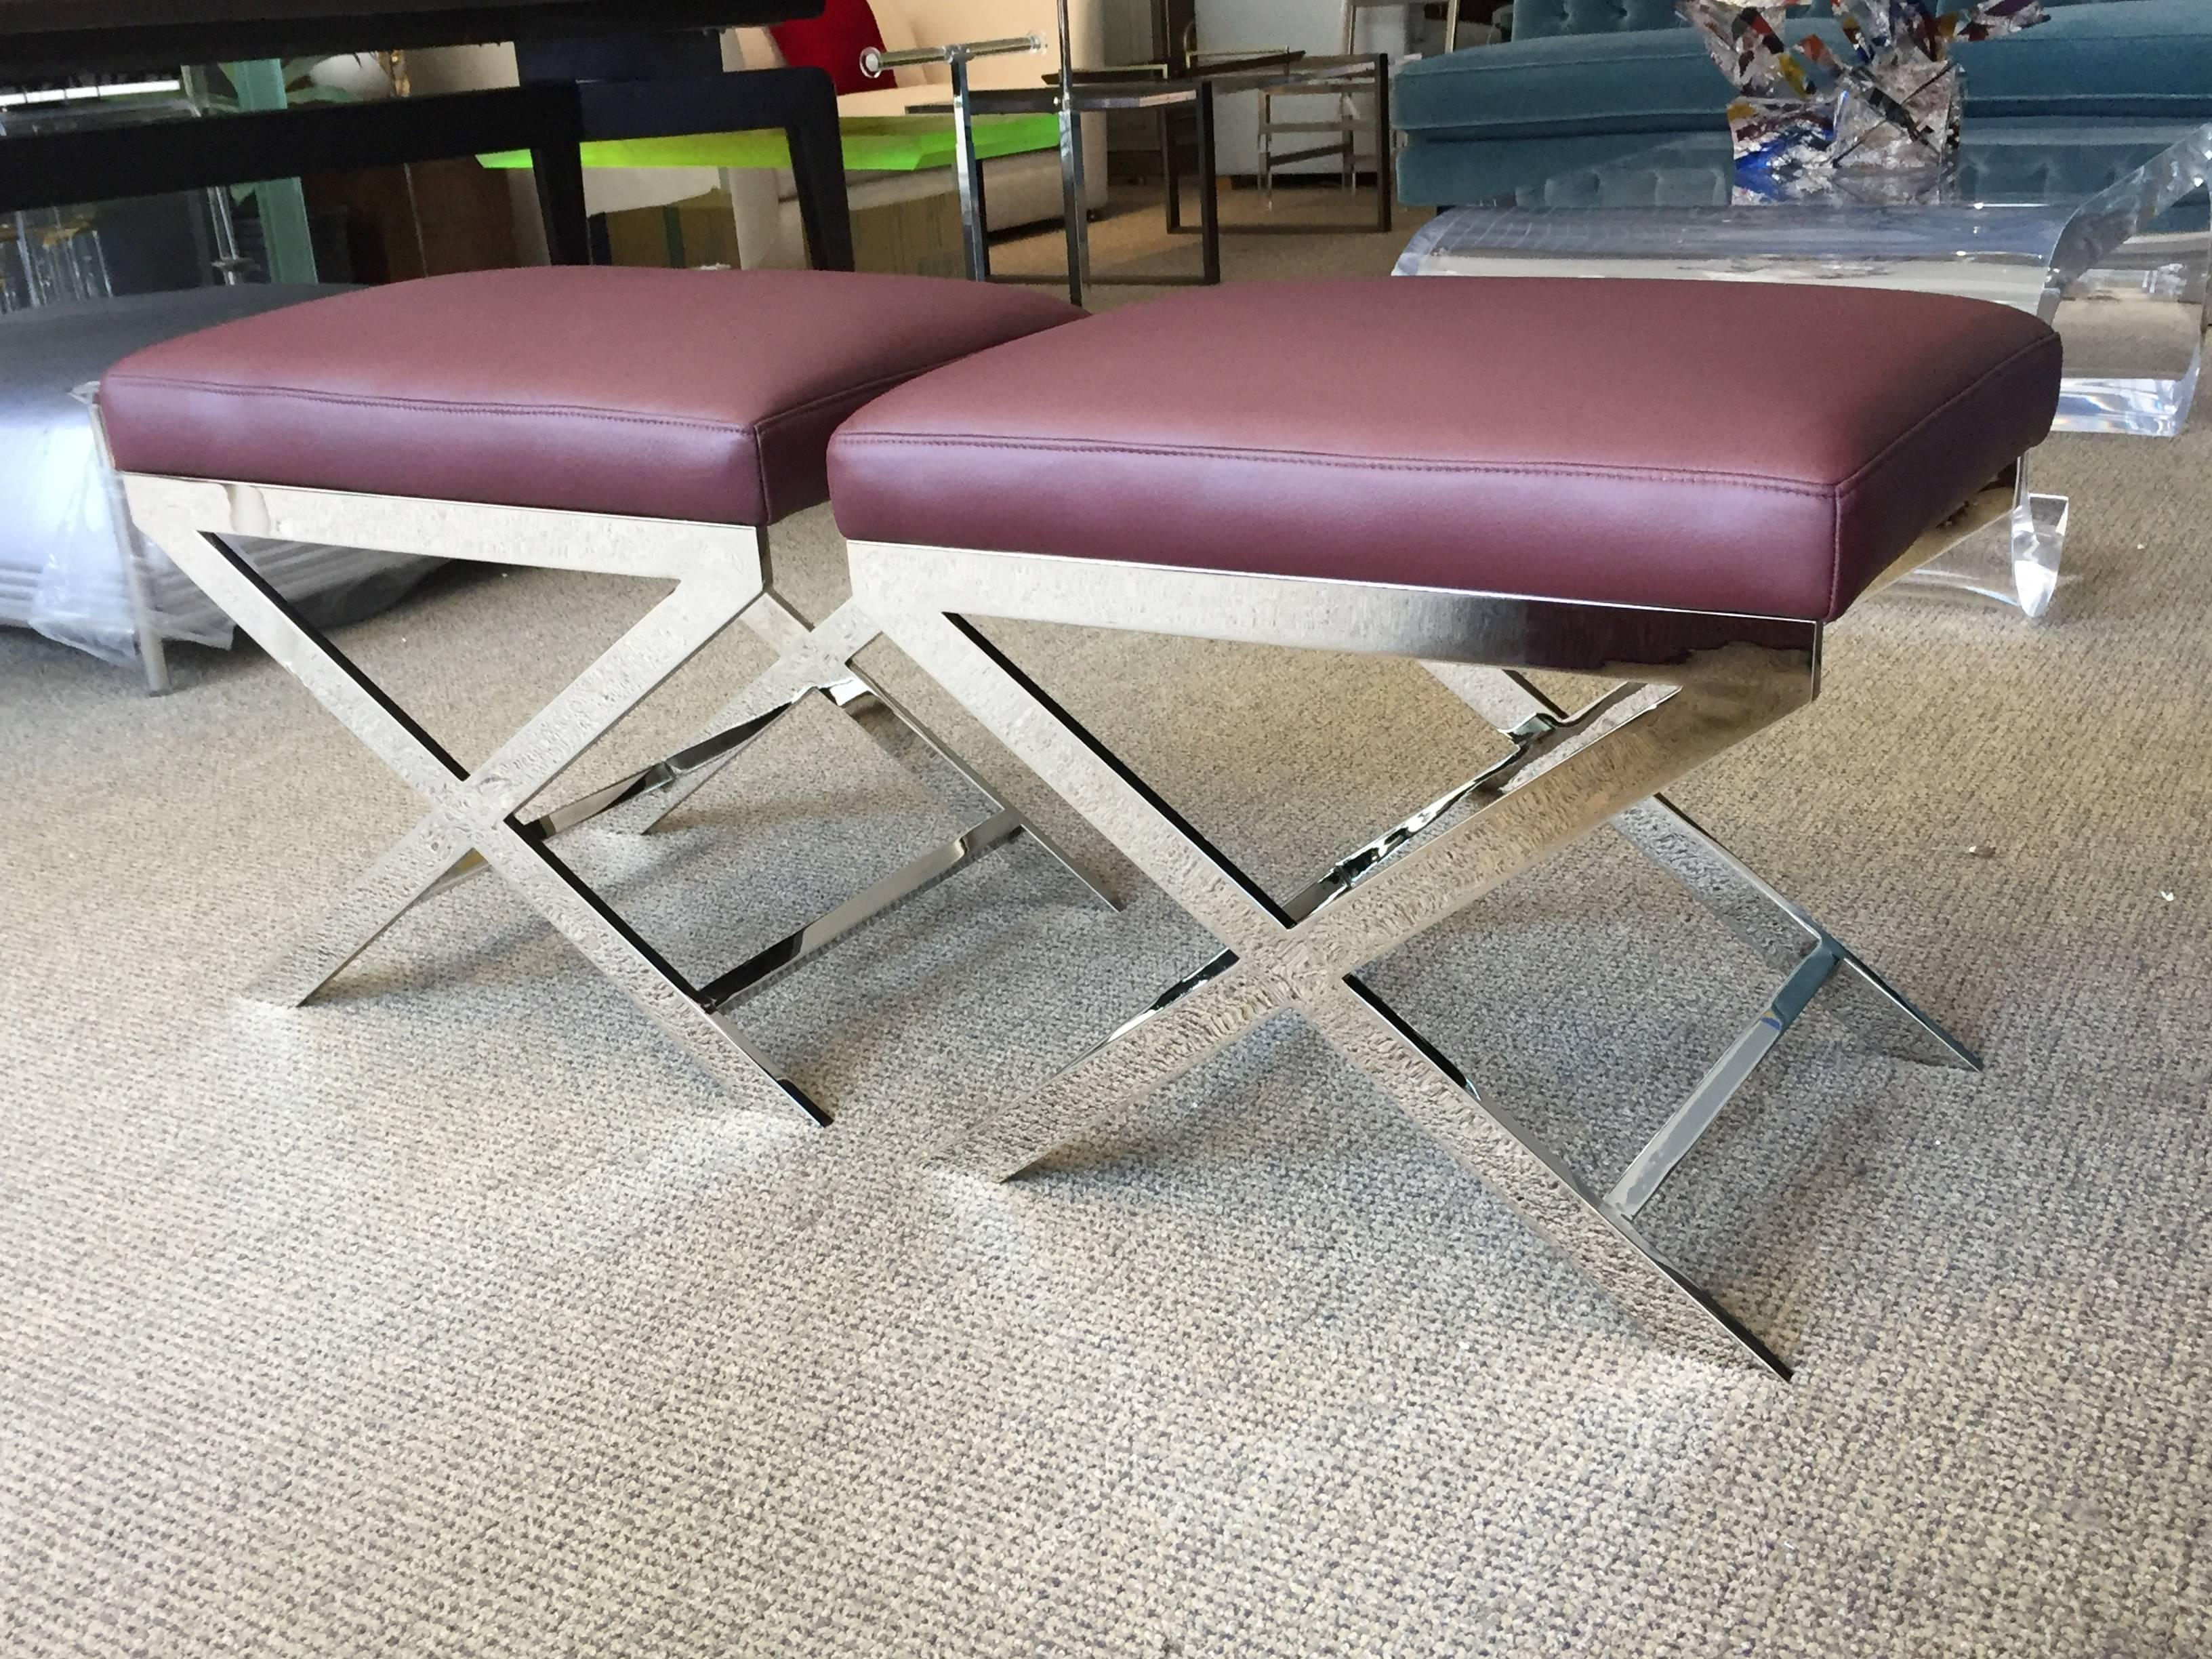 Stunning and minimalistic benches designed and manufactured by Charles Hollis Jones.
These benches are very versatile and perfect for condominiums and modern environments and they are also perfect to be used in the bedroom or living room.

The